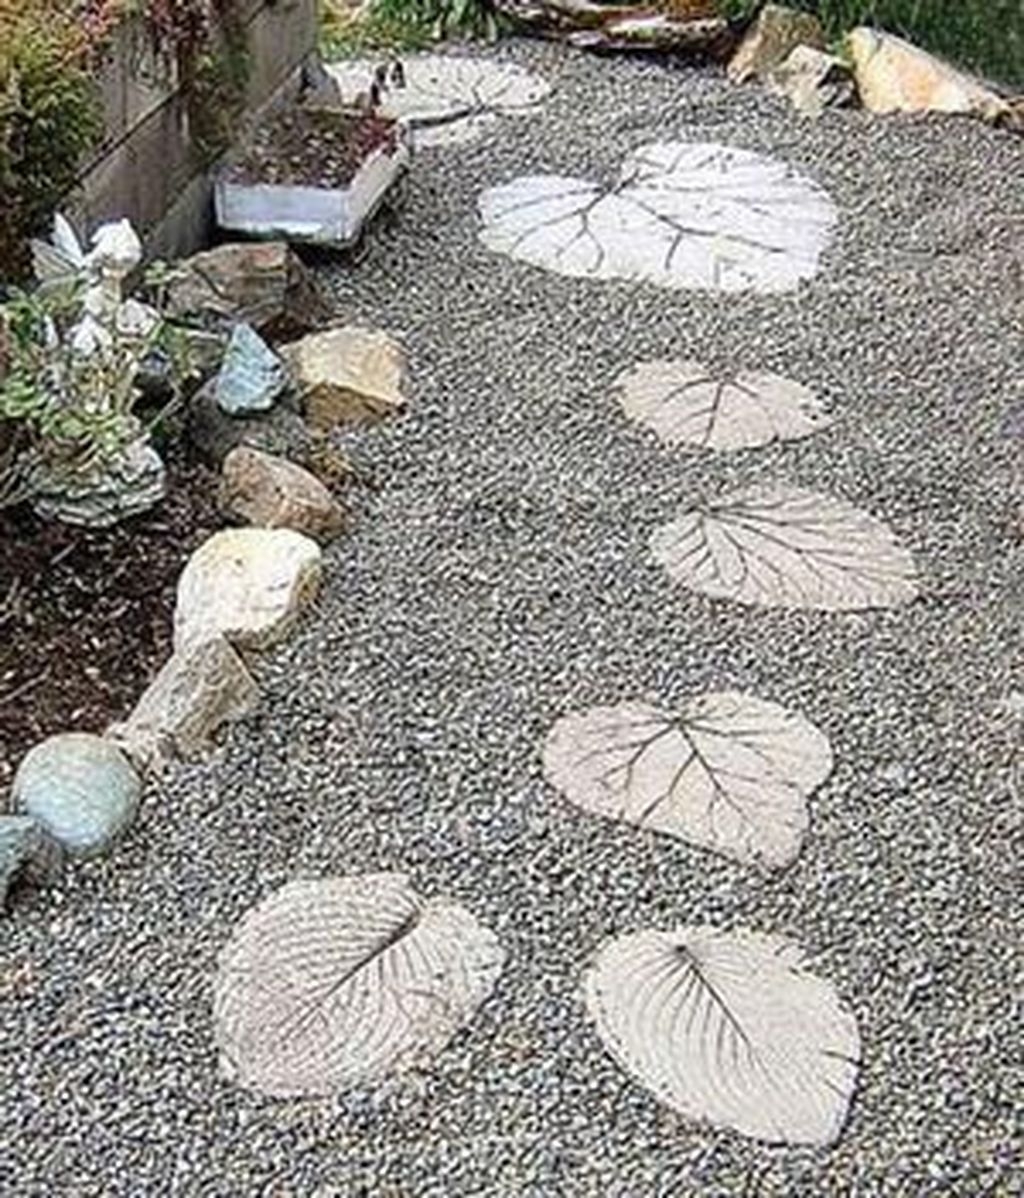 Newest Stepping Stone Pathway Ideas For Your Garden 34